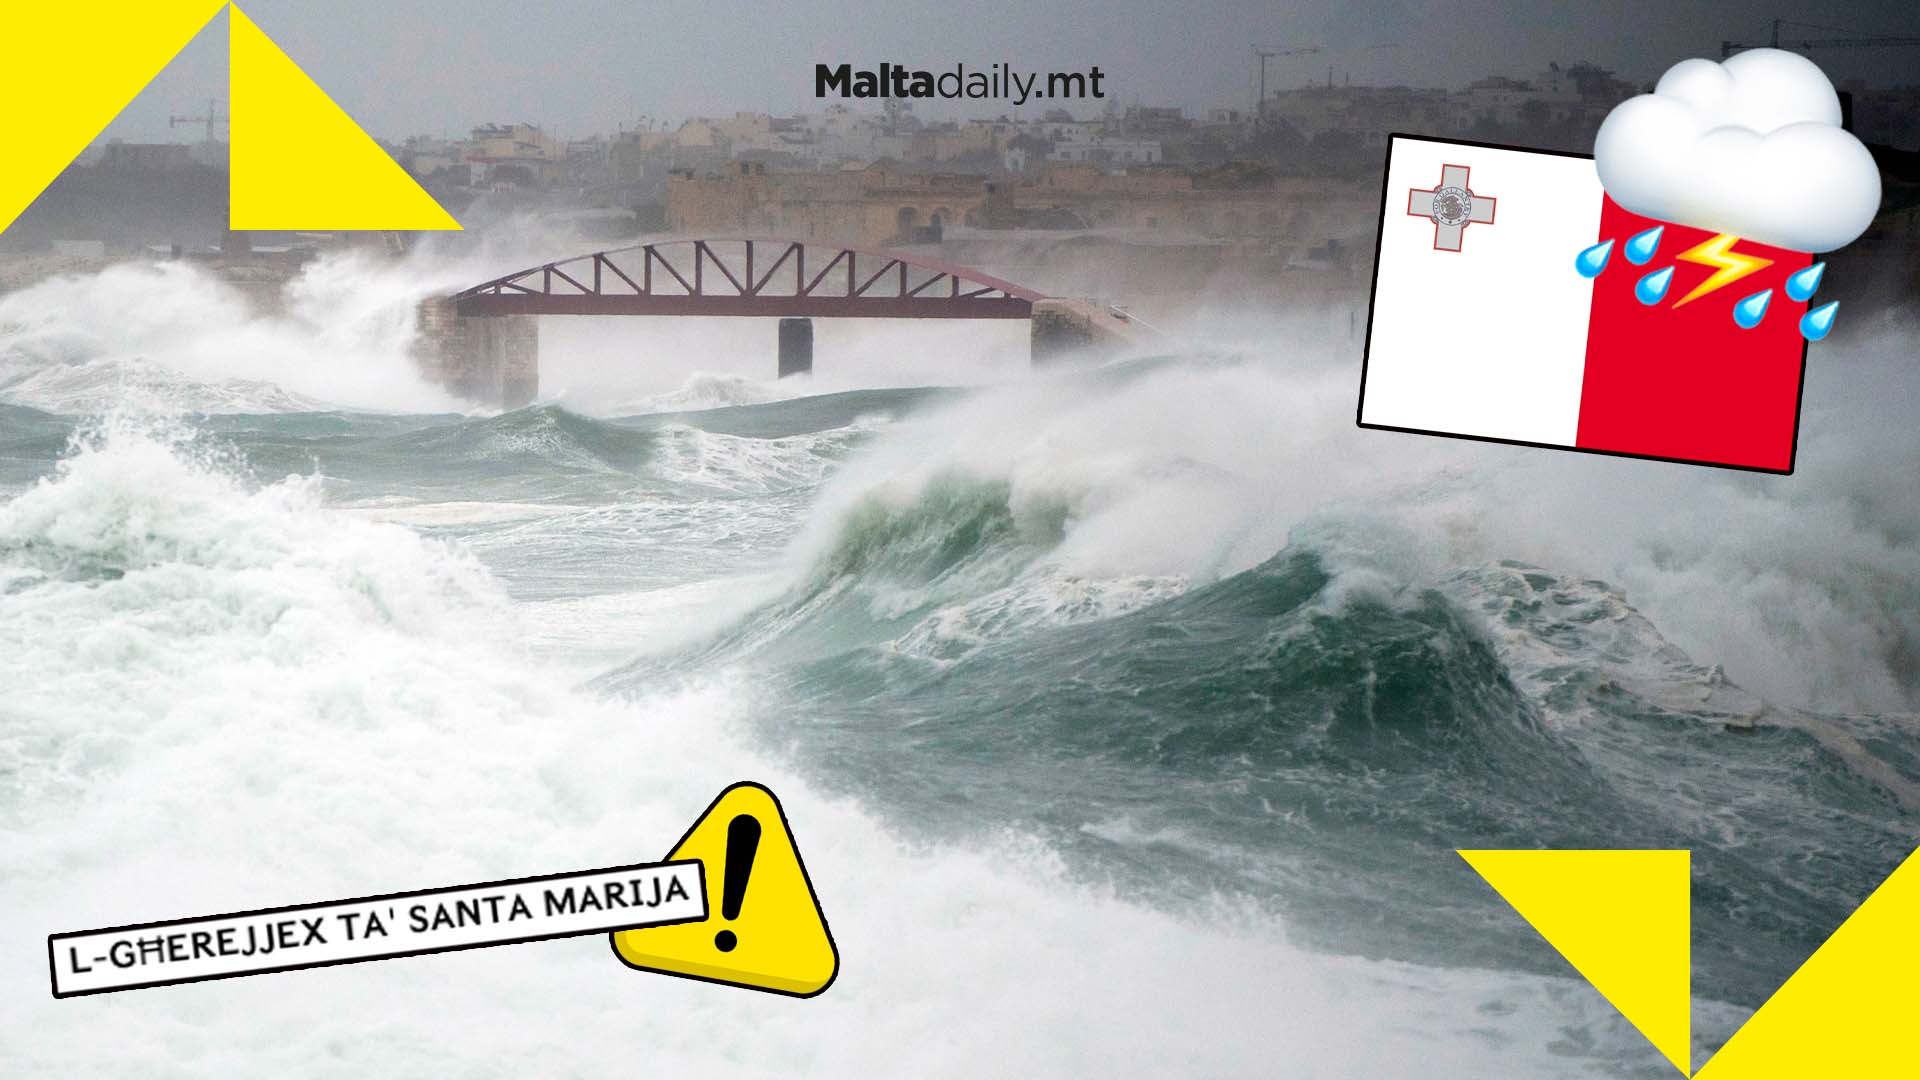 First summer storm to hit Malta between Wednesday and Saturday